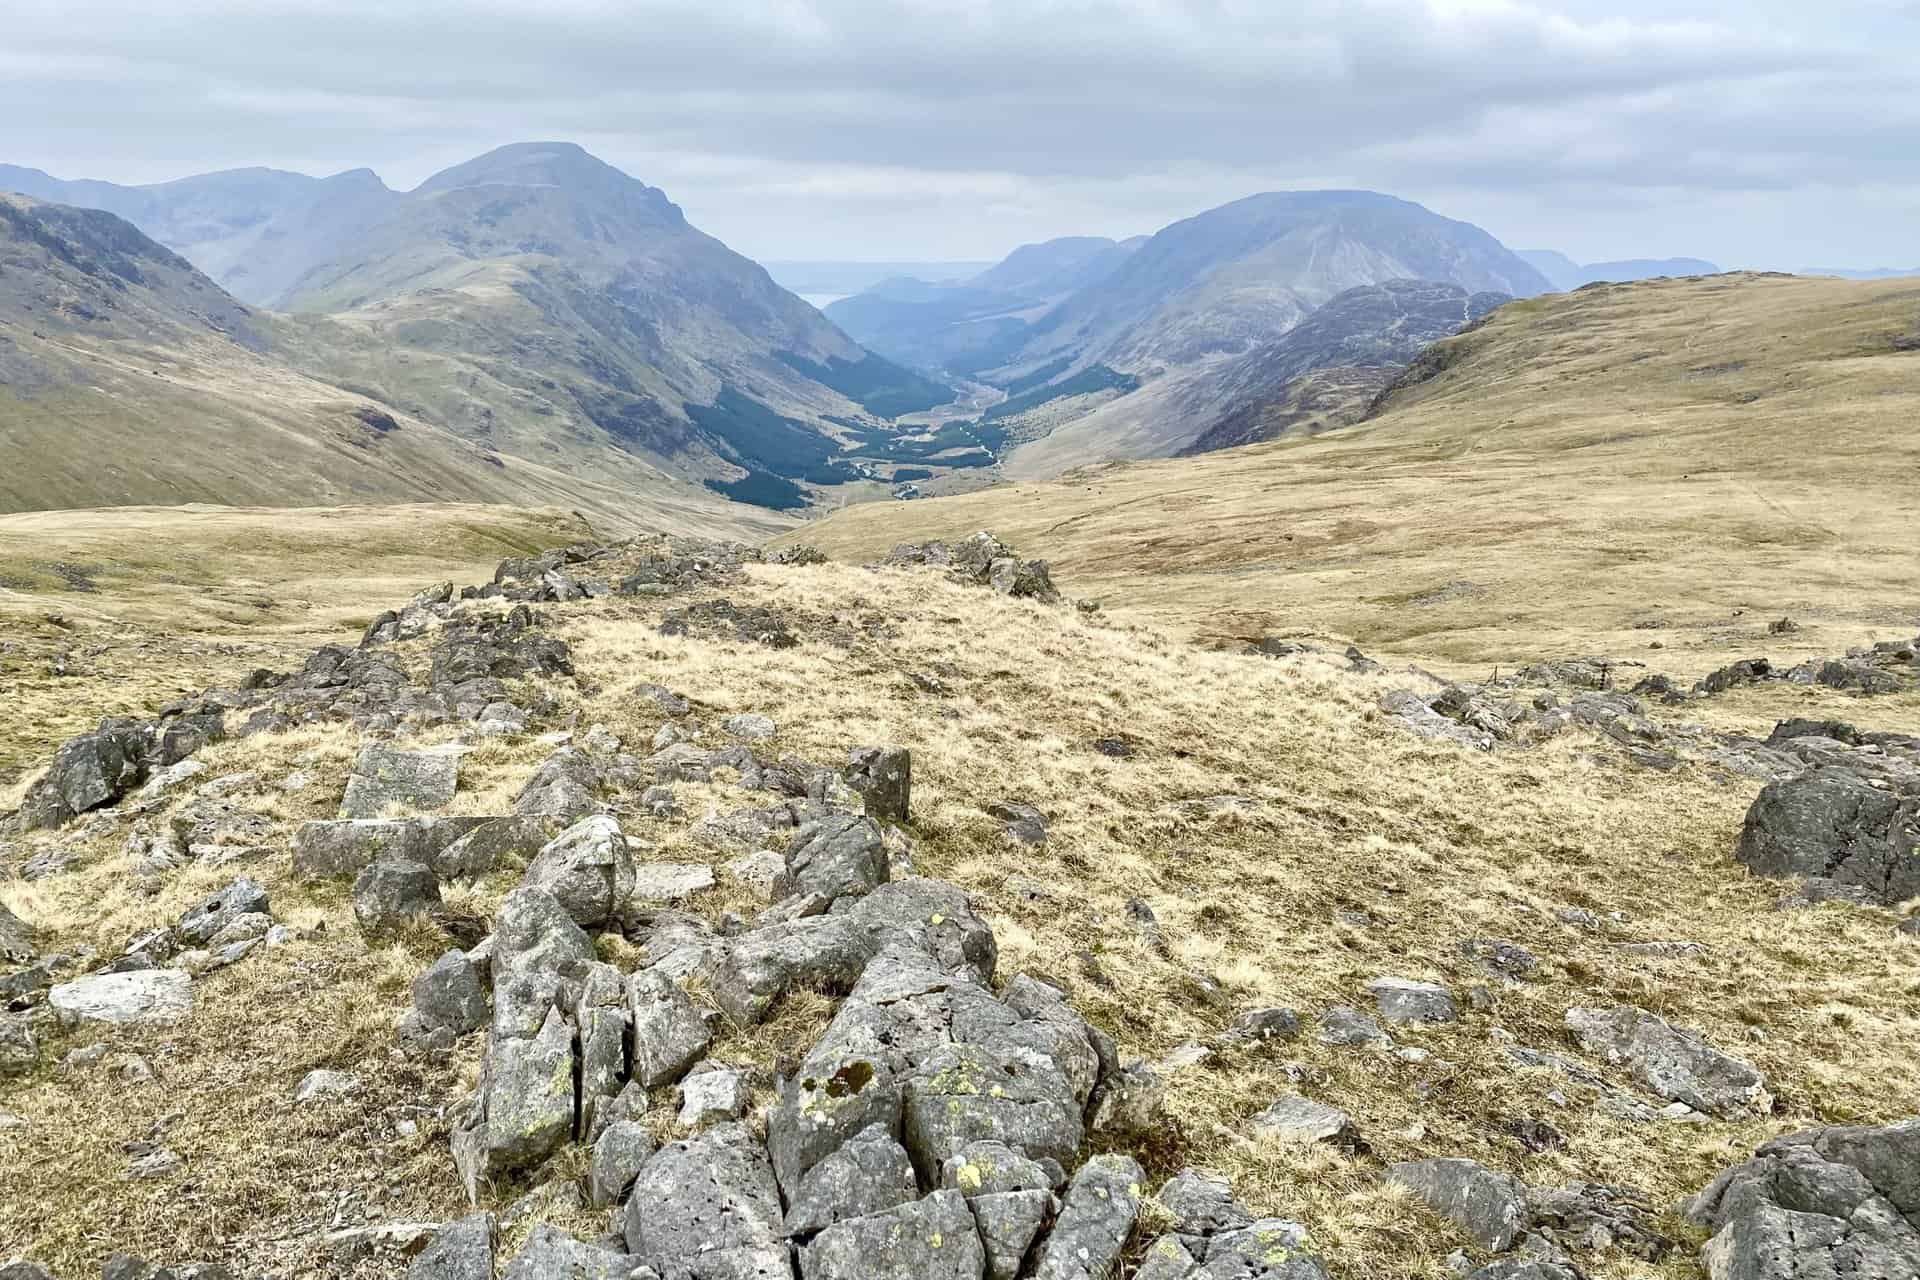 Looking north-west towards the Ennerdale valley. The River Liza flows through the valley to reach Ennerdale Water which can just be seen in the distance.